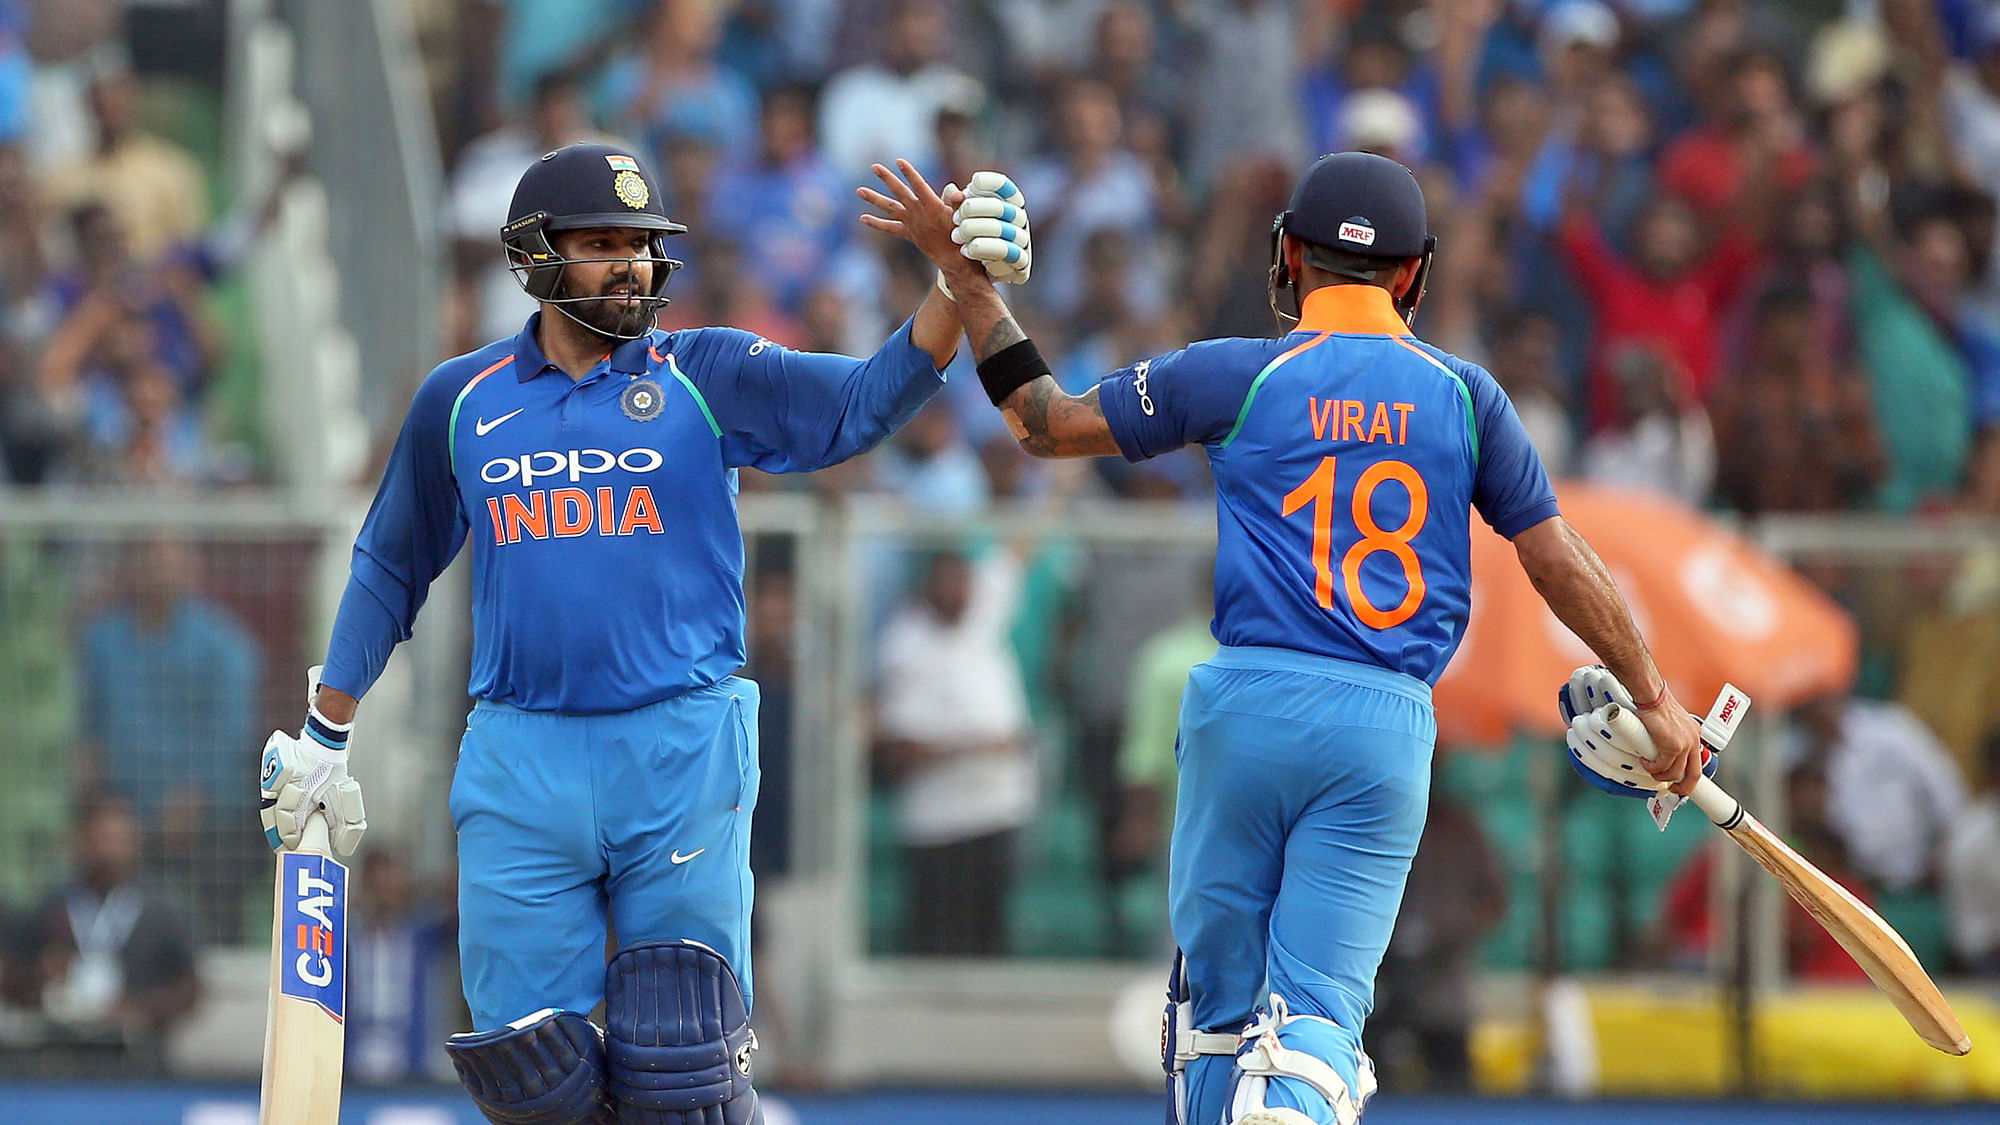 Rohit Sharma finished as the top run-scorer this year in ODIs while Virat Kohli is  top run-scorer in all formats.